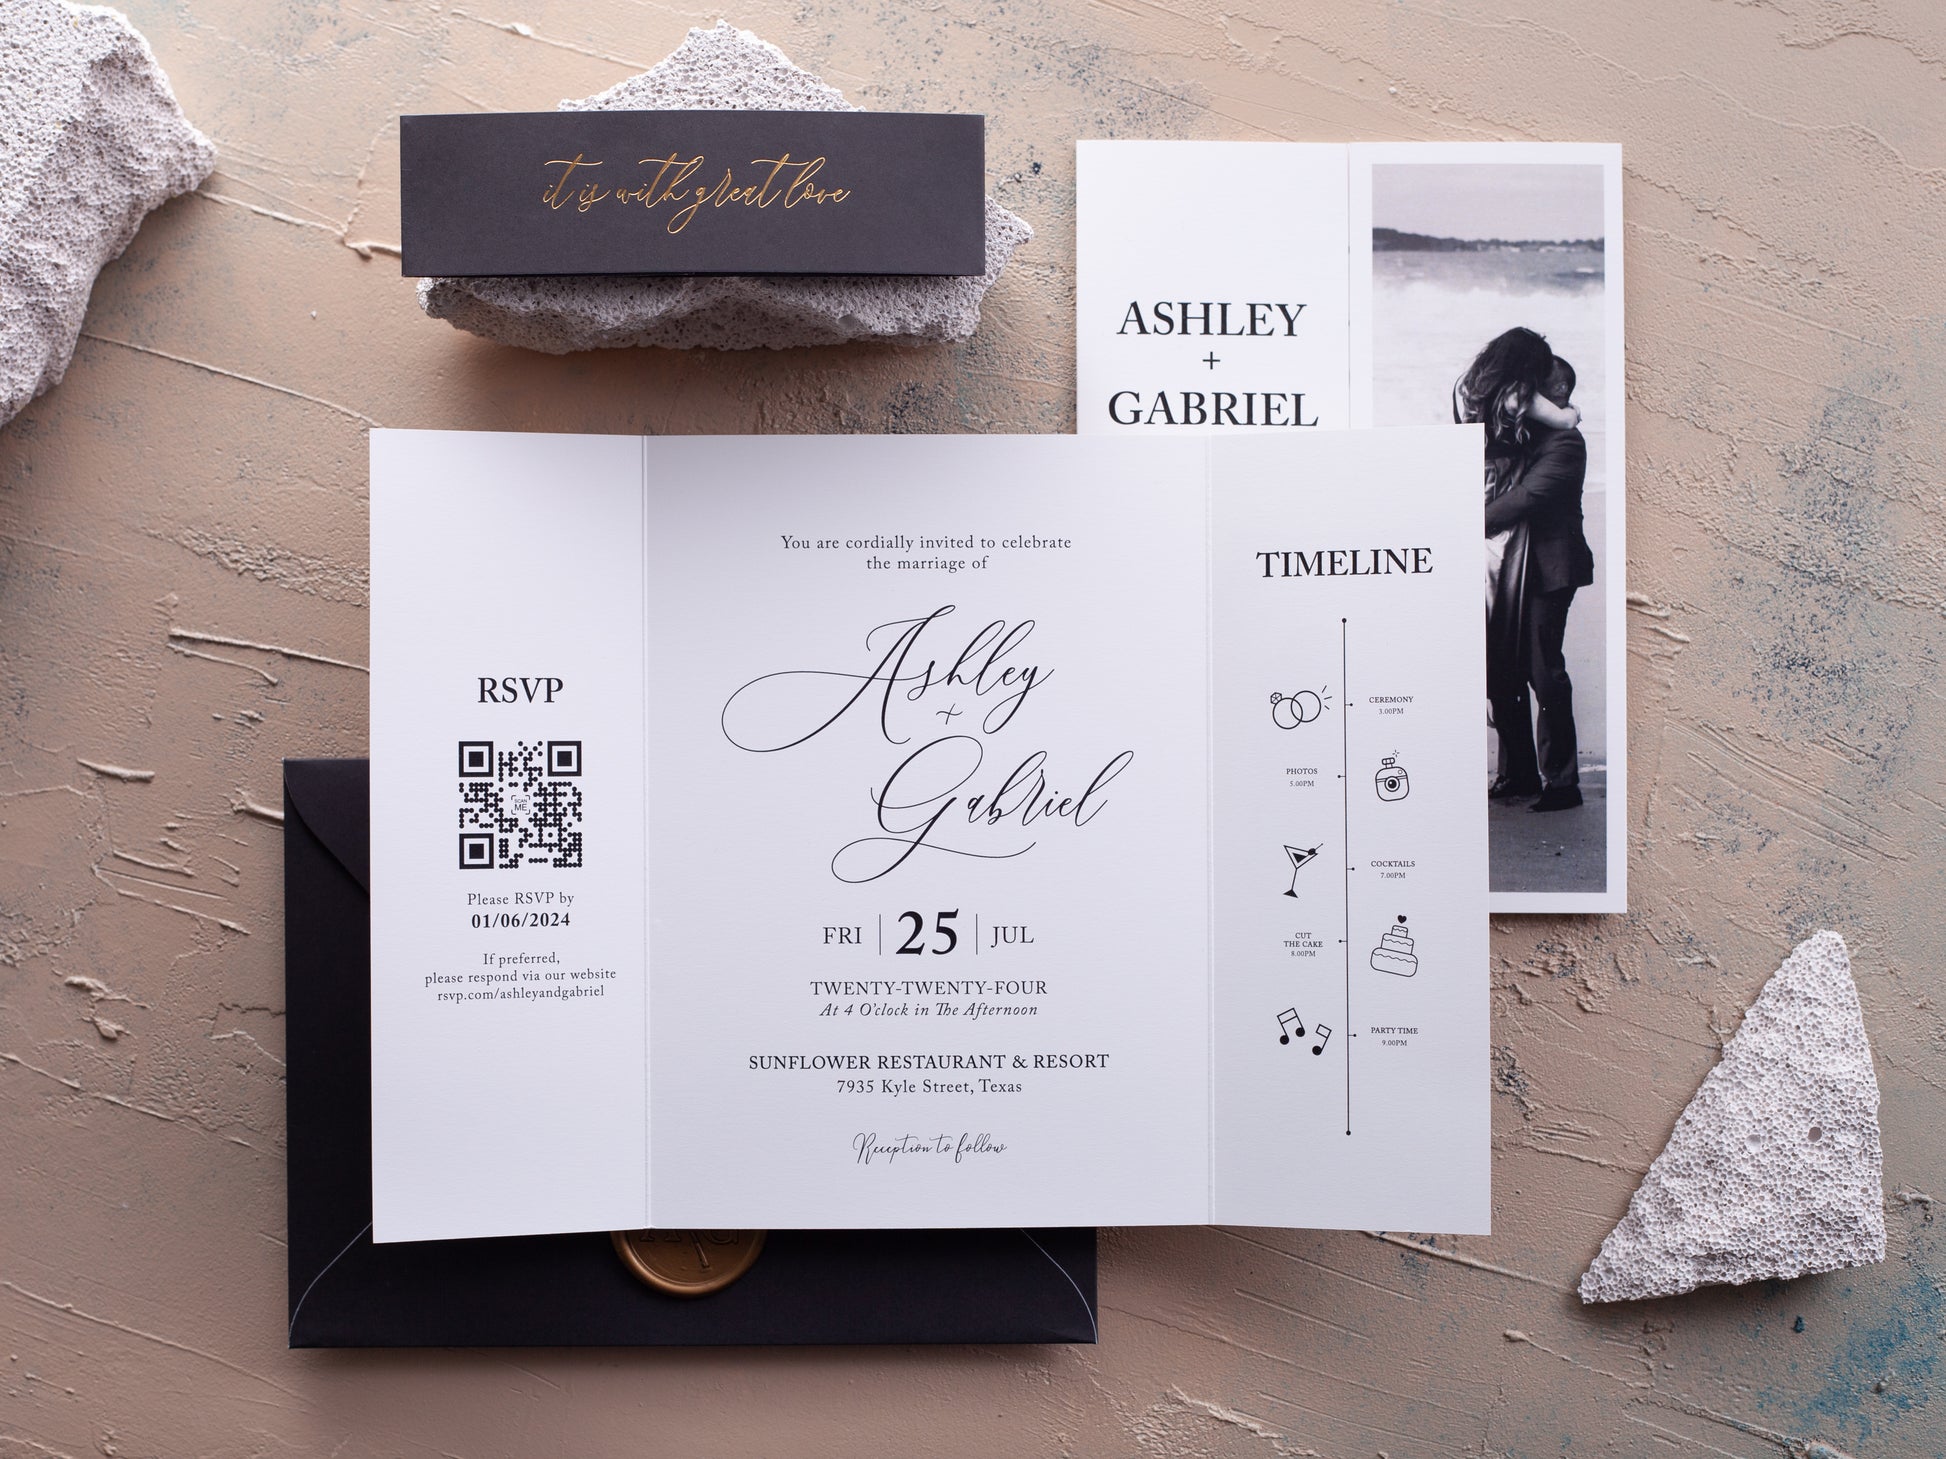 Gatefold wedding invitation with black and white colors